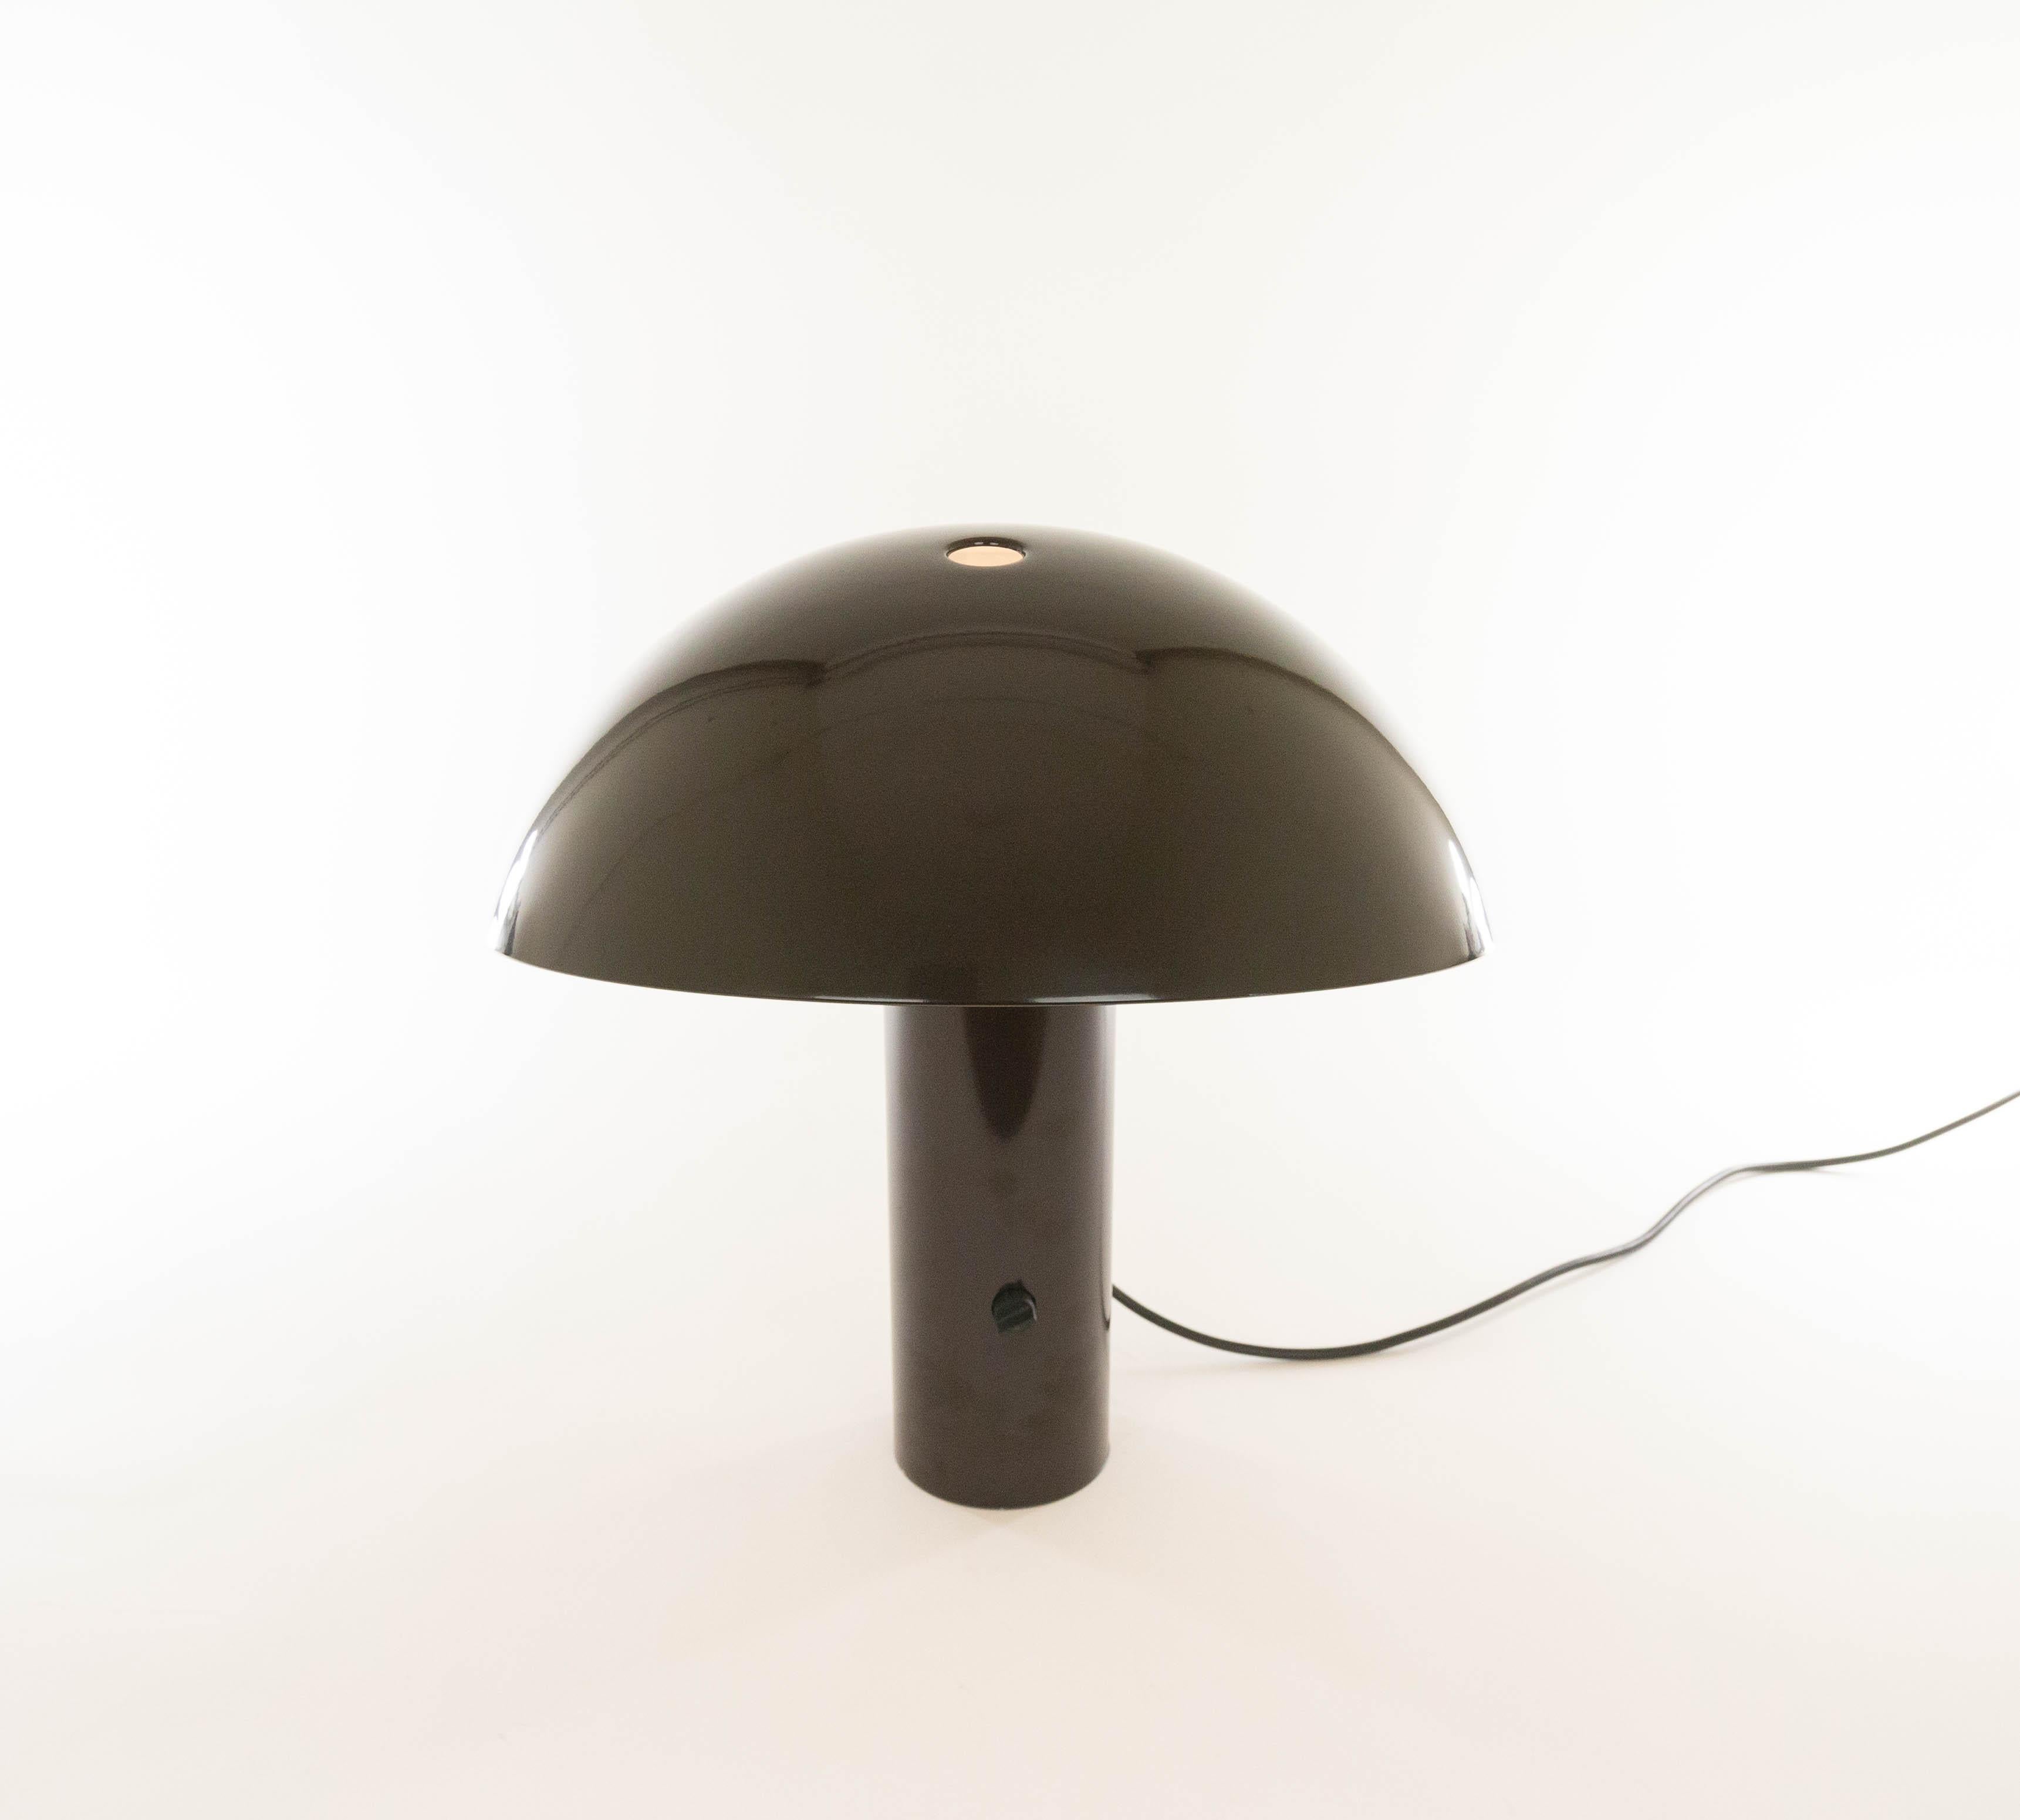 Lacquered Brown Vaga Table Lamp by Franco Mirenzi for Valenti, 1970s For Sale